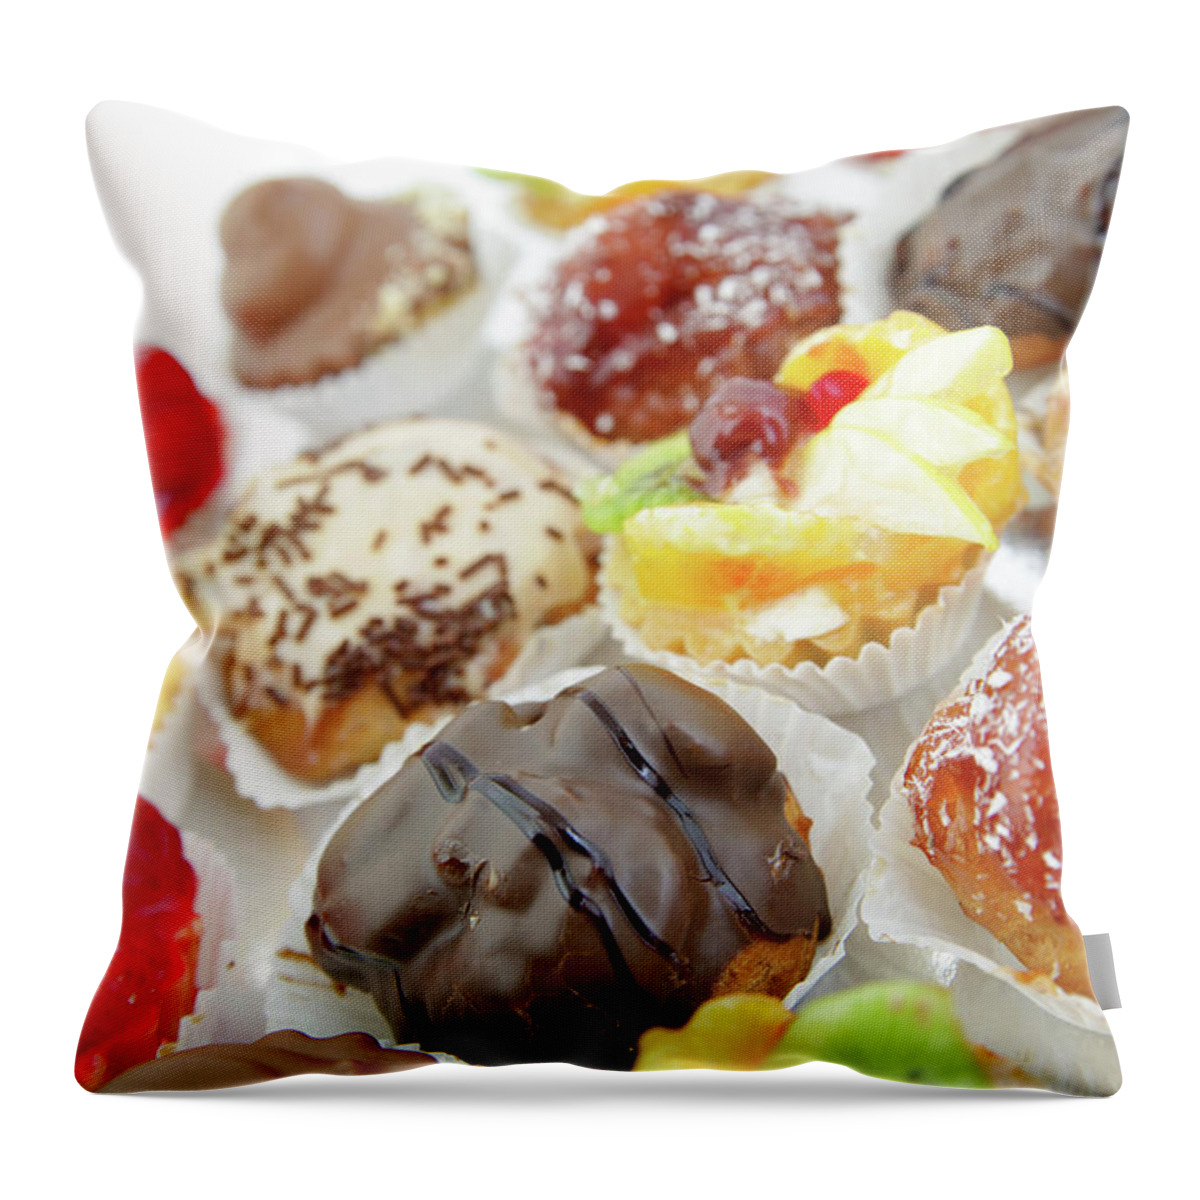 Small cakes with with different stuffing Throw Pillow by Michael Dechev -  Pixels